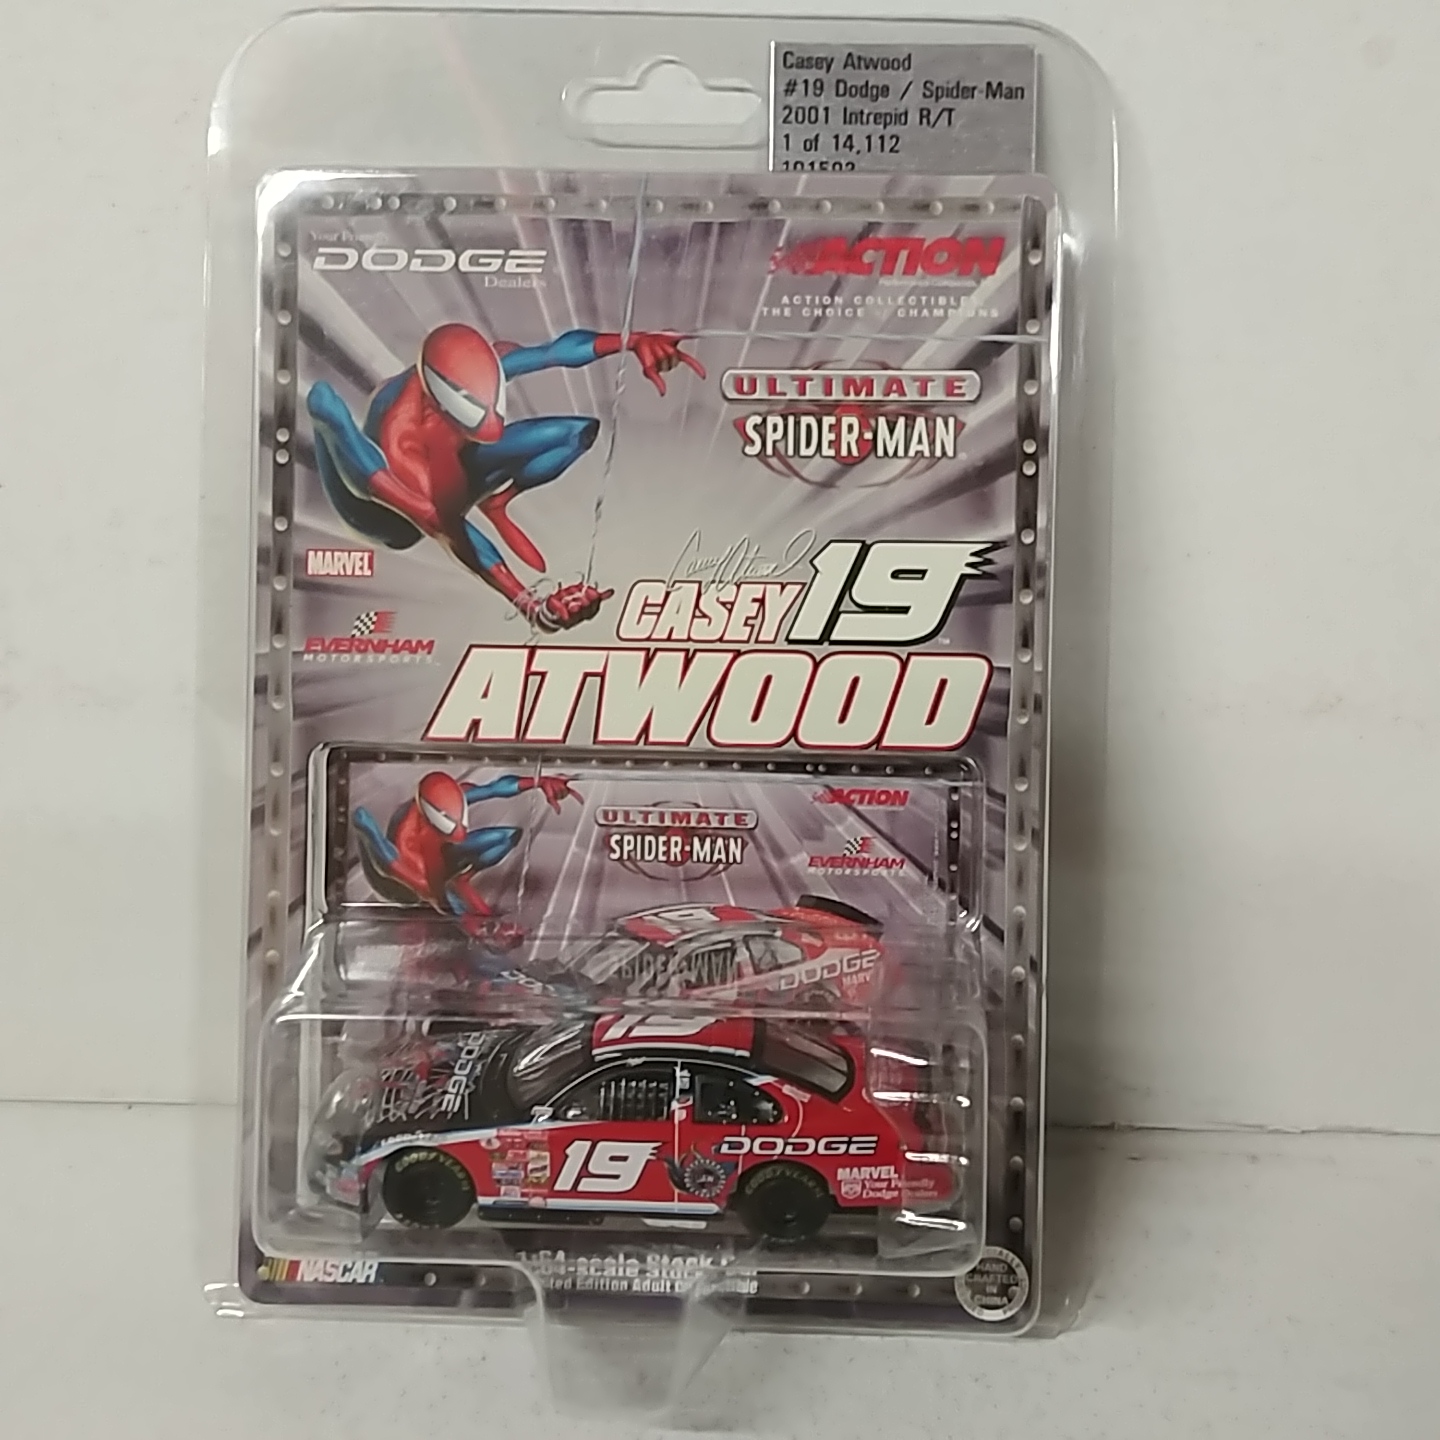 2001 Casey Atwood 1/64th Dodge Dealers "Spiderman" ARC Intrepid R/t